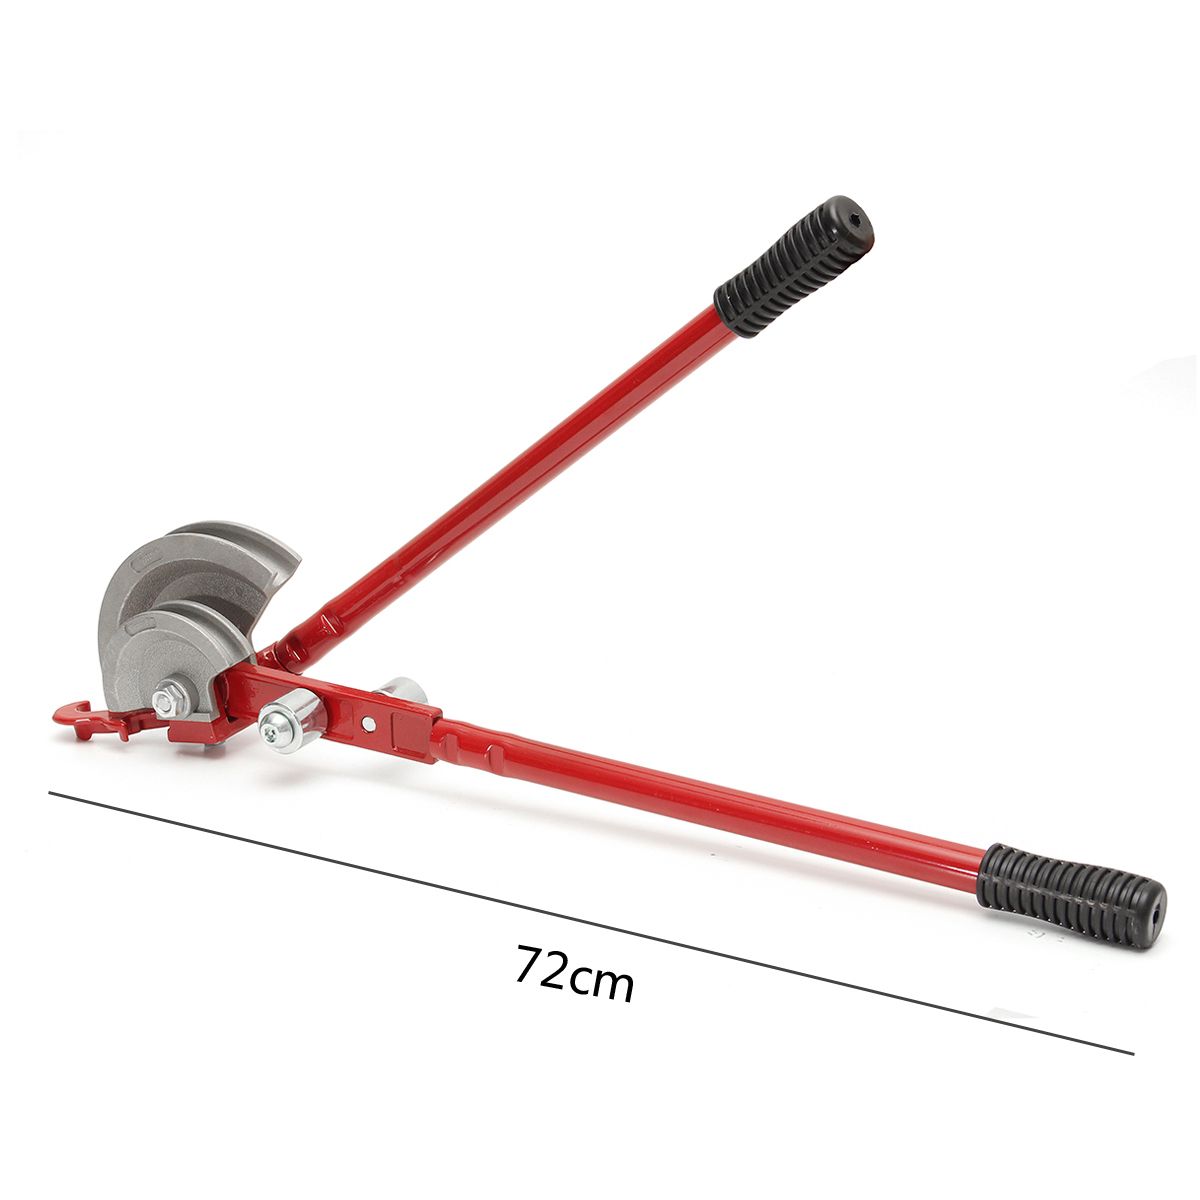 Heavy-Duty-Pipe-Tube-Bender-Steel-Aluminum-Alloy-With-15--22mm-Pipe-Handheld-1246732